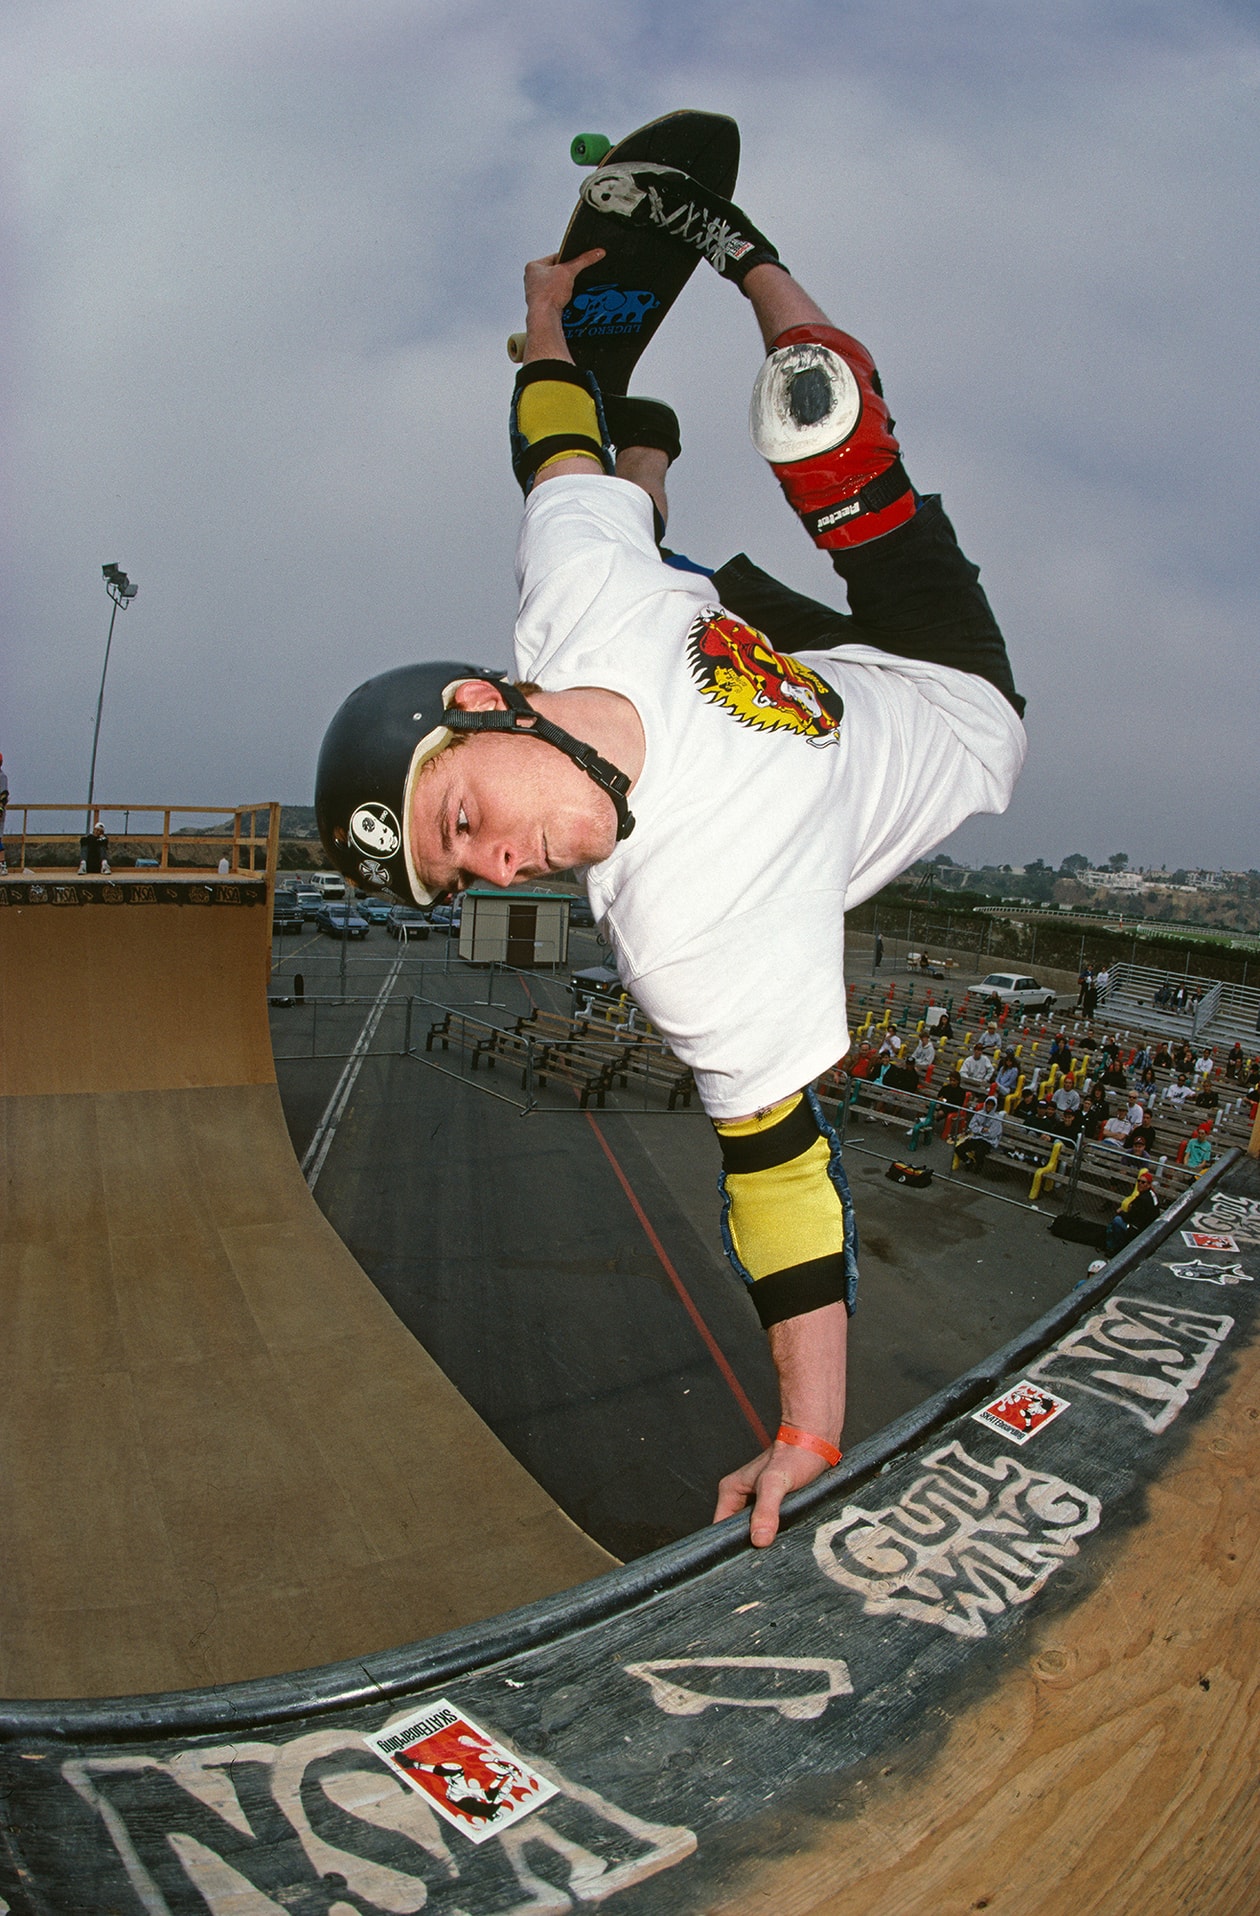 Jeff Grosso R.I.P.—Photos By Dave Swift